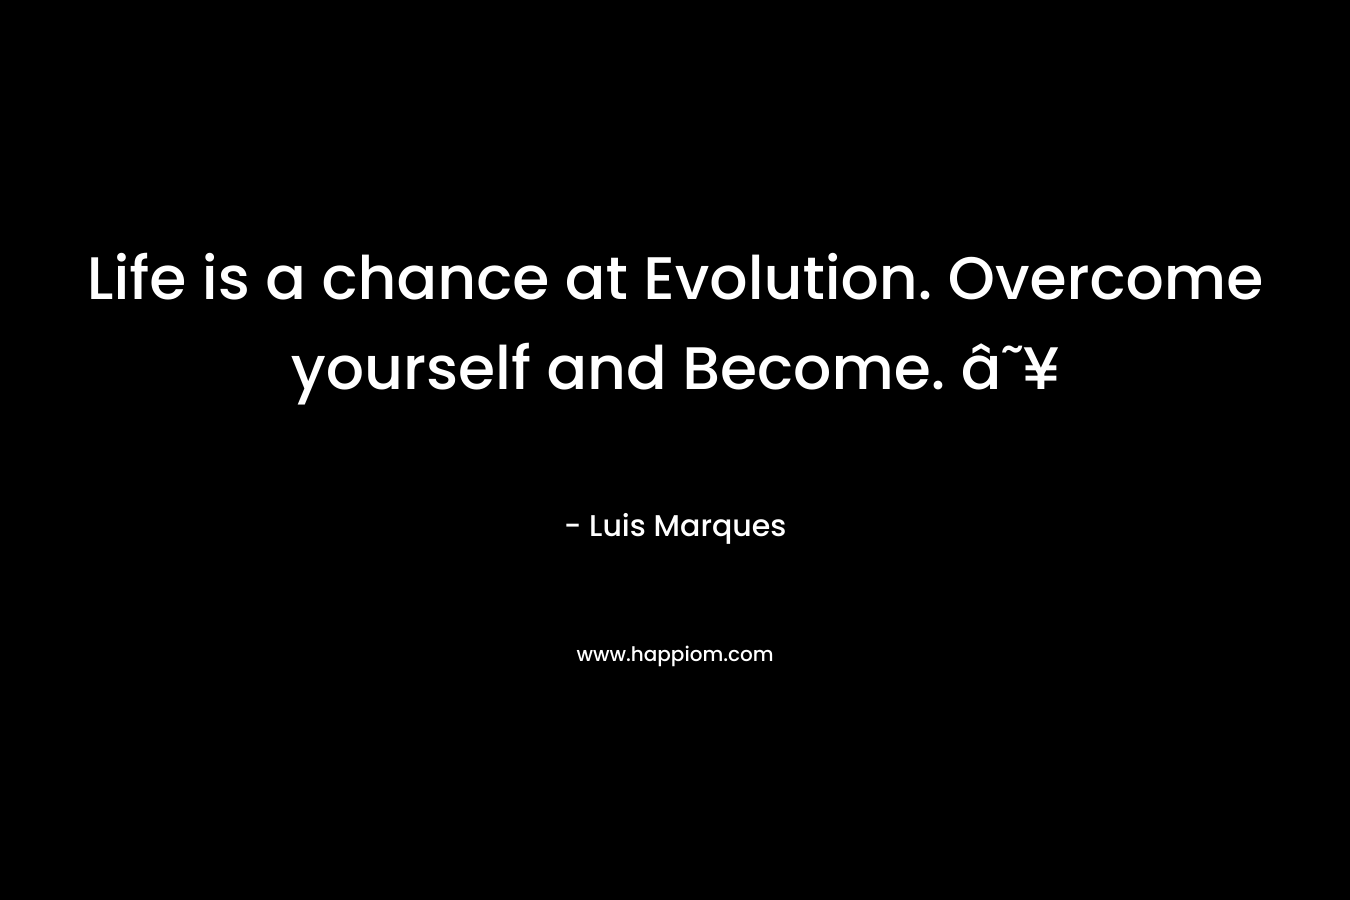 Life is a chance at Evolution. Overcome yourself and Become. â˜¥